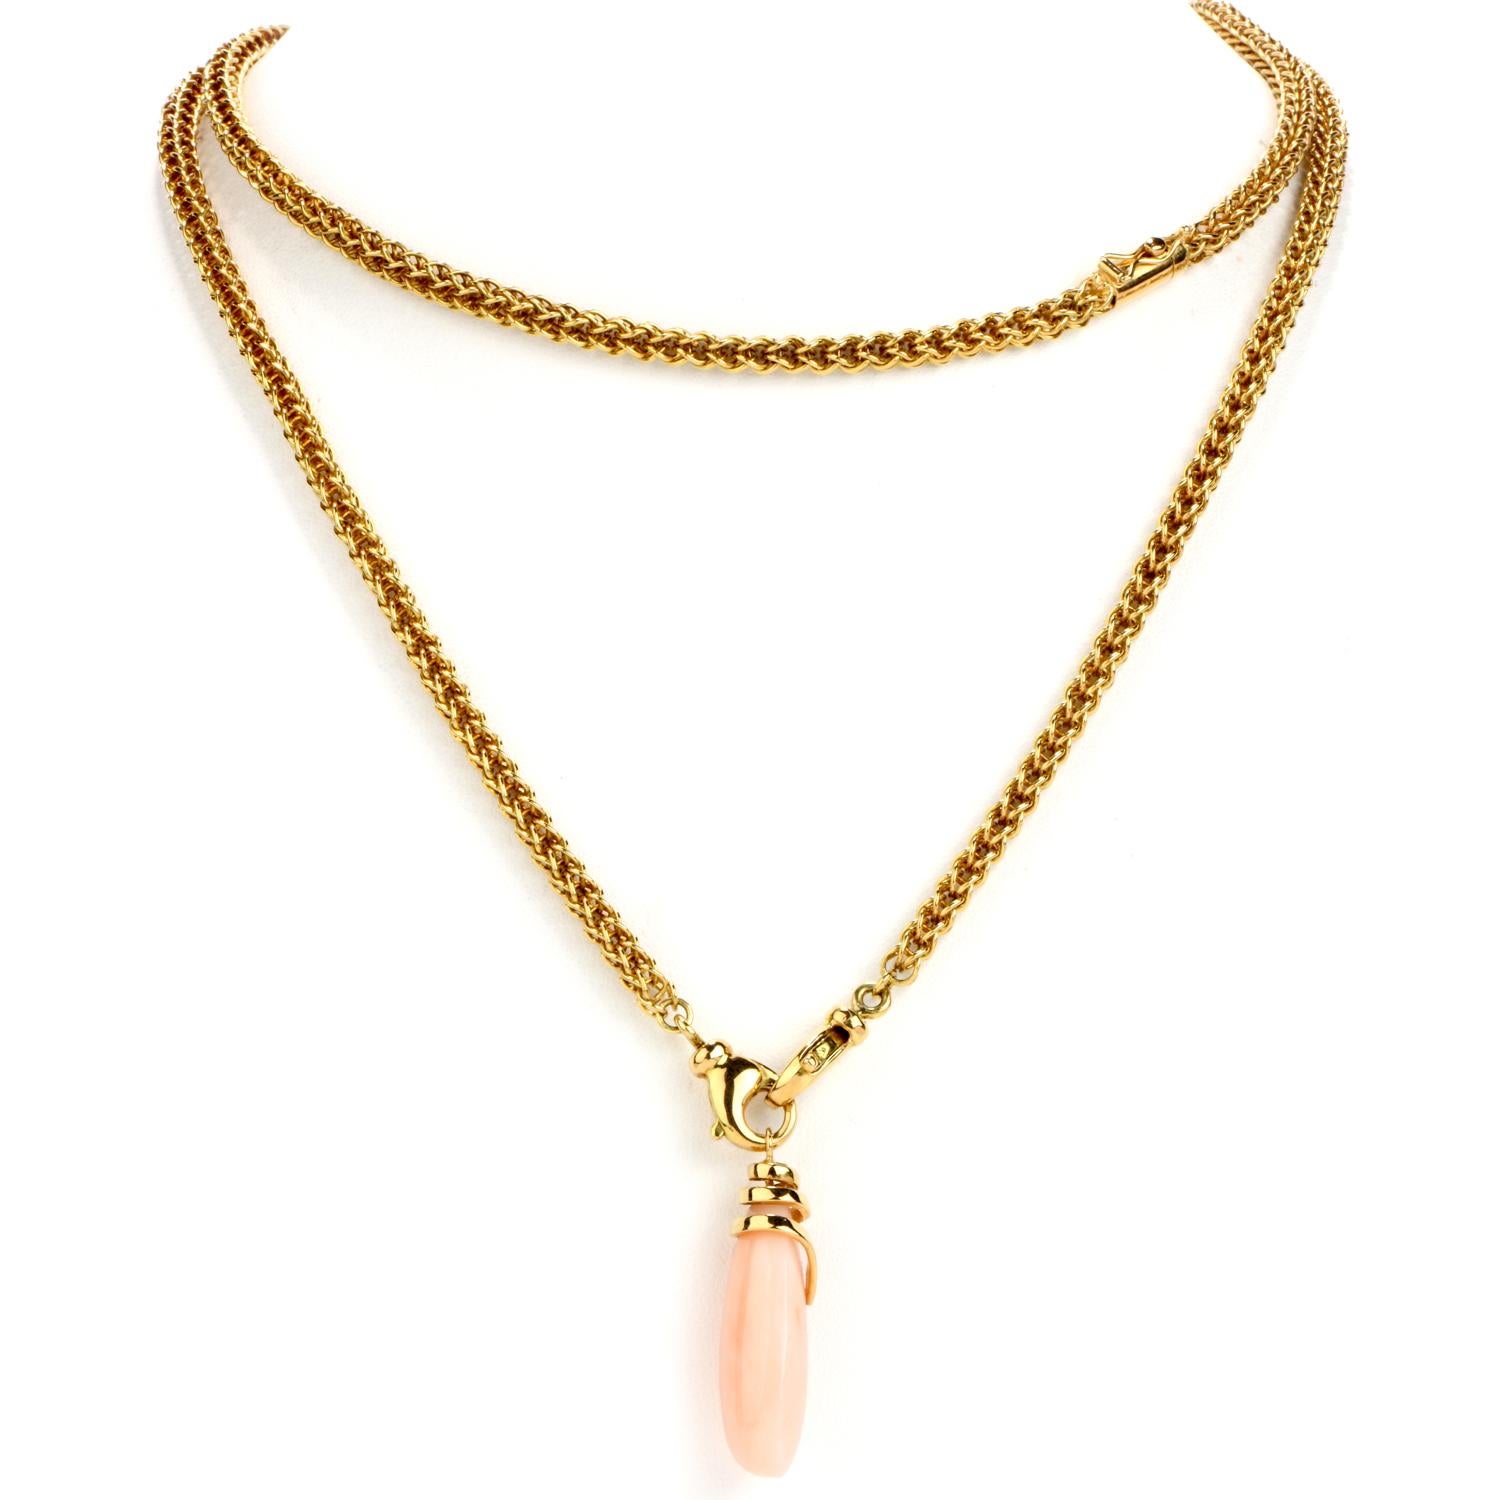 Have multiple beautiful pieces of jewelry in one with this versatile Vintage Coral 18K Gold Convertible Drop Necklace and Earring Jackets! 

This rope chain necklace is crafted in 18 karat yellow gold.  There are two lobster claw clasps near the